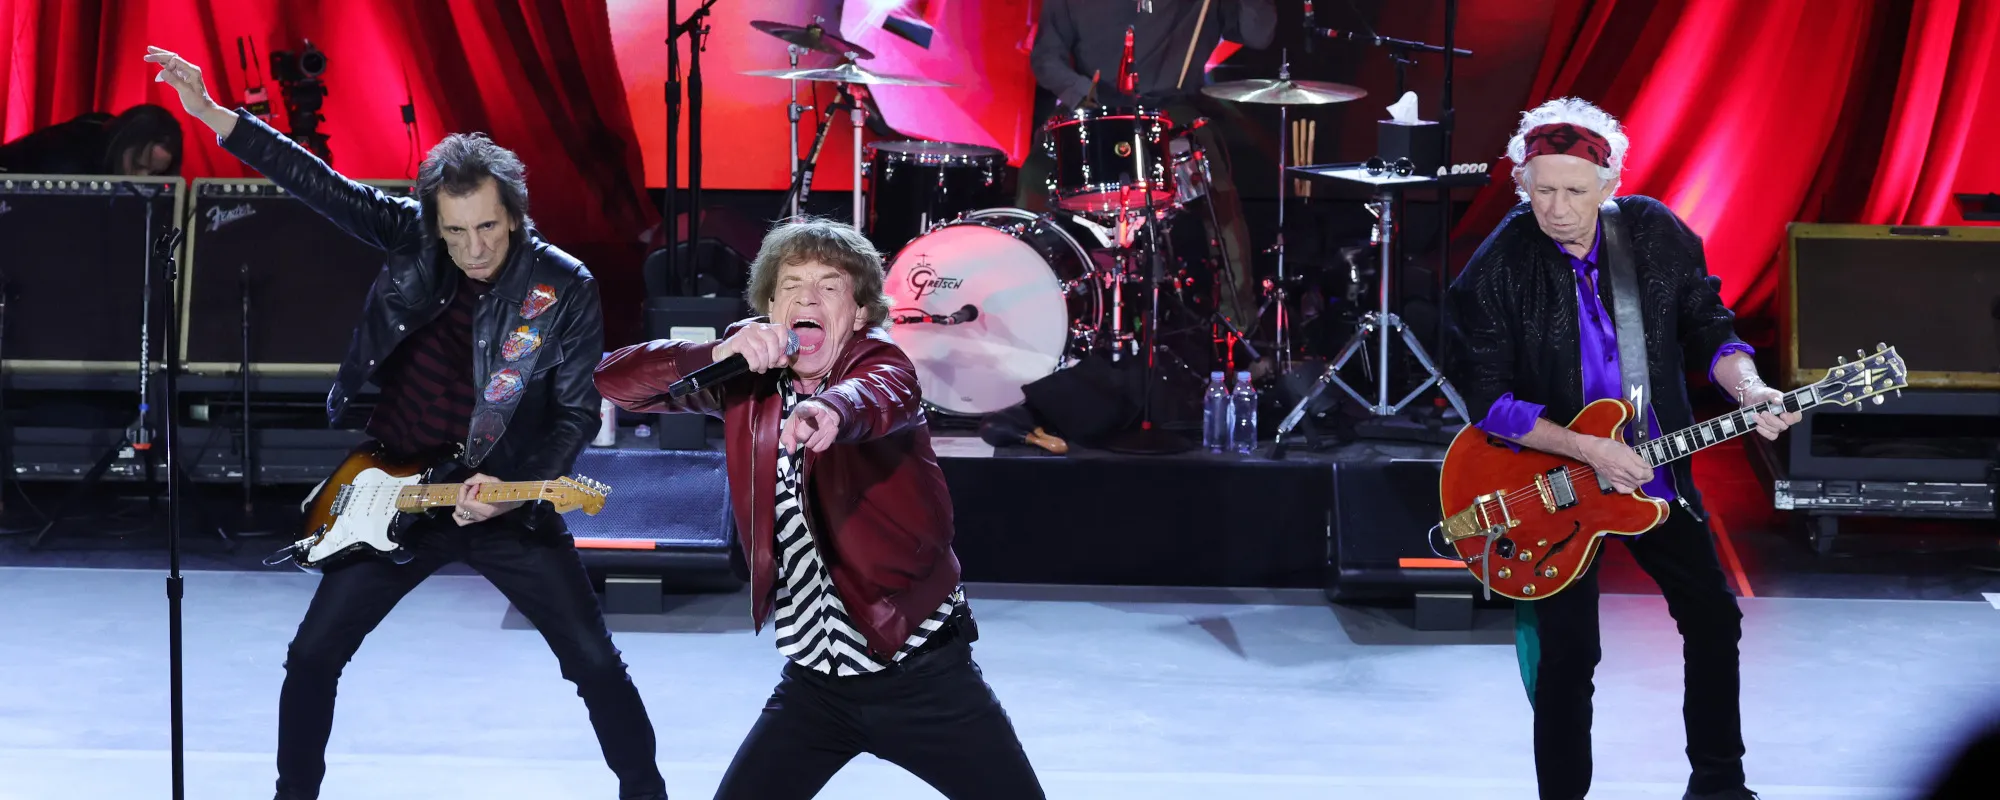 The Rolling Stones Play Surprise NYC Show, with Guest Lady Gaga, to Celebrate New Album’s Release; See Photos